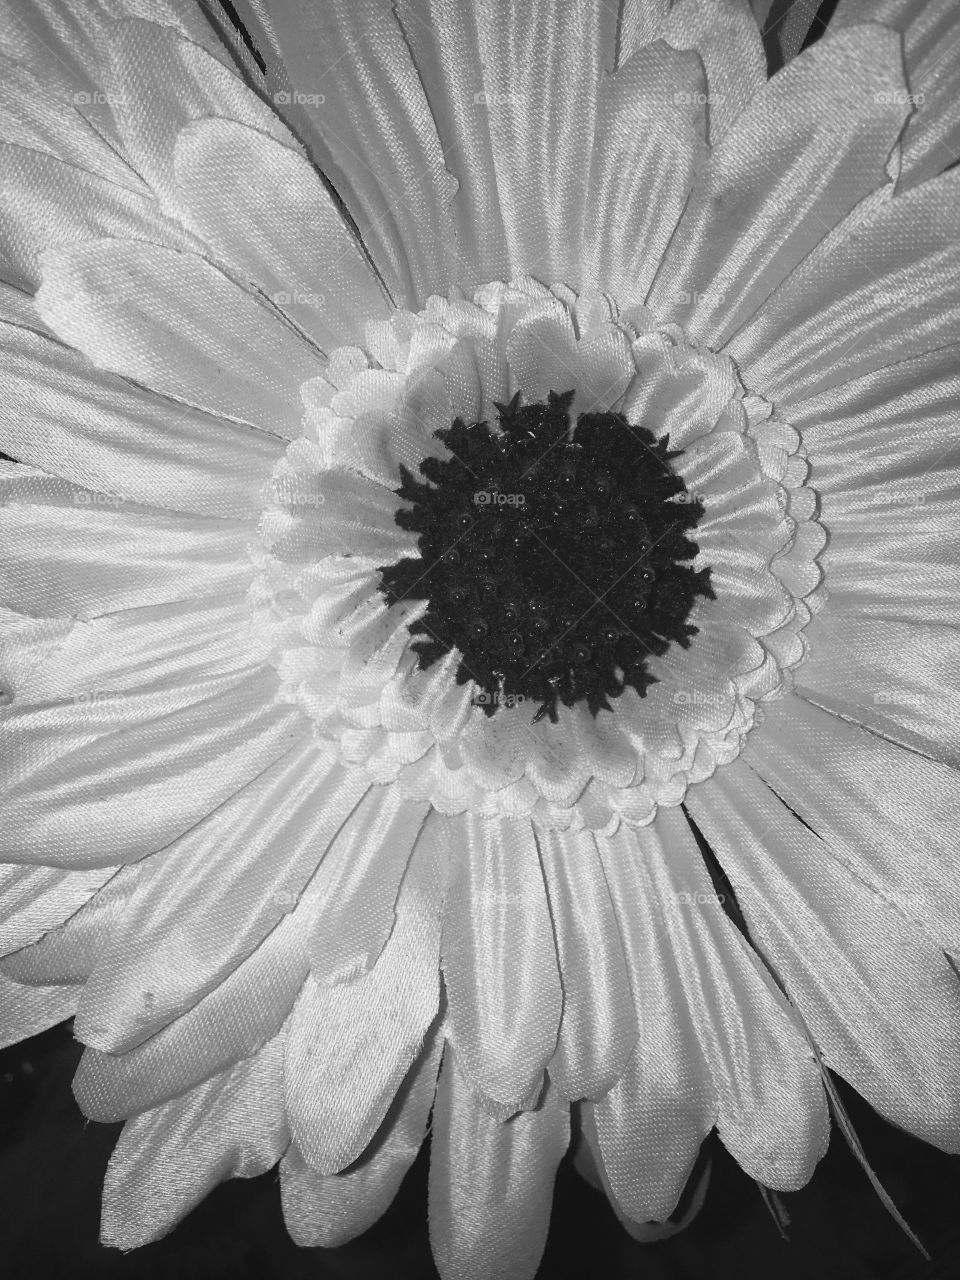 Flower. Black and white nature